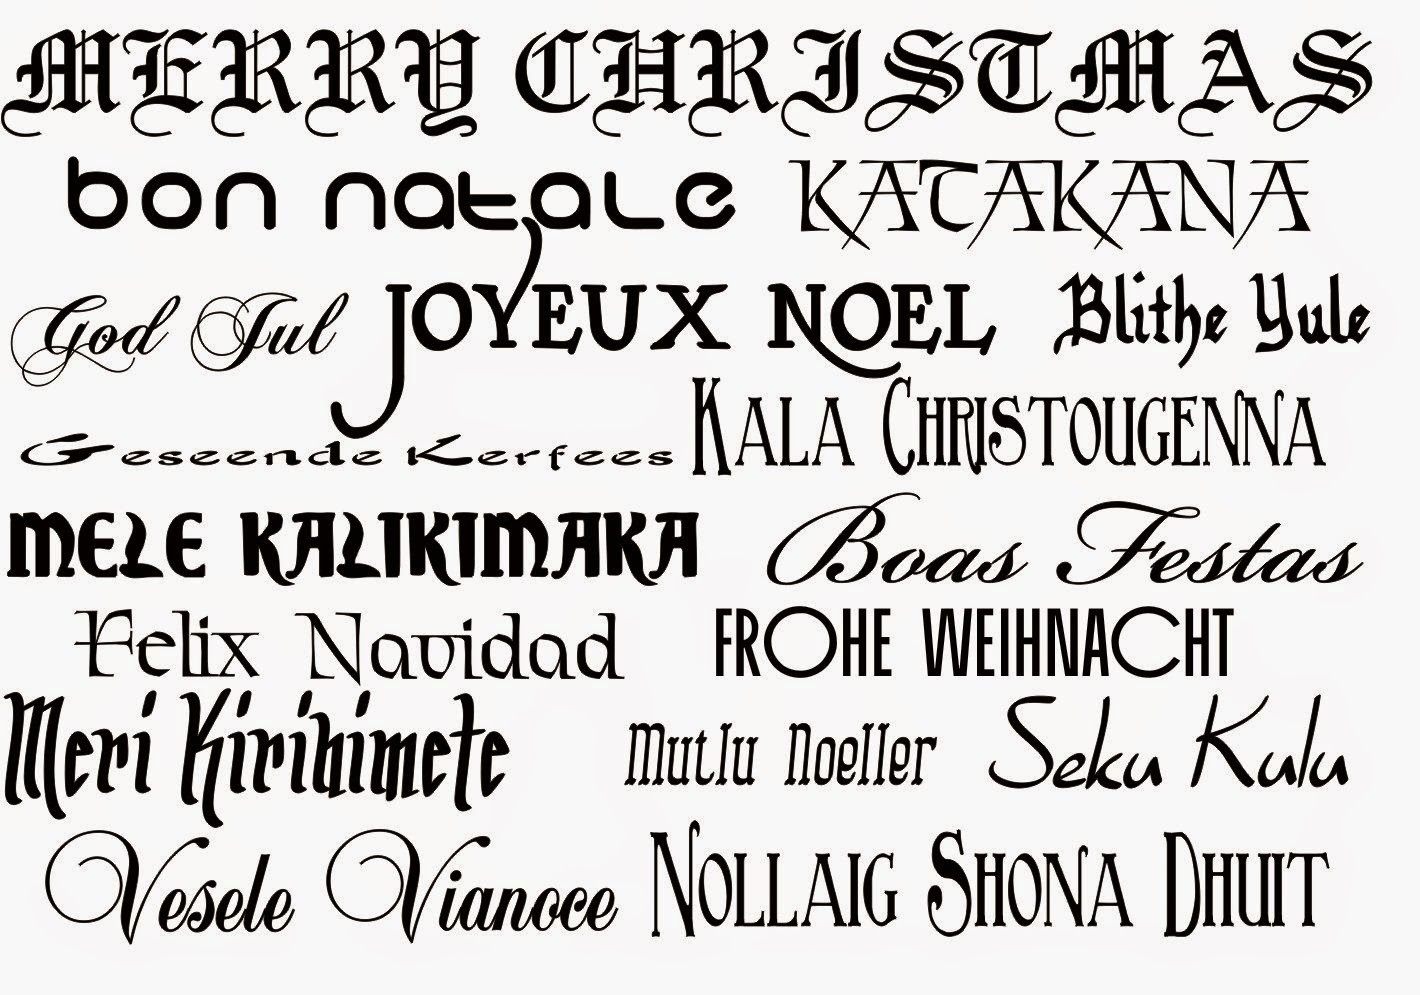 [Christmas-in-All-Different-Languages-Cards%255B3%255D.jpg]